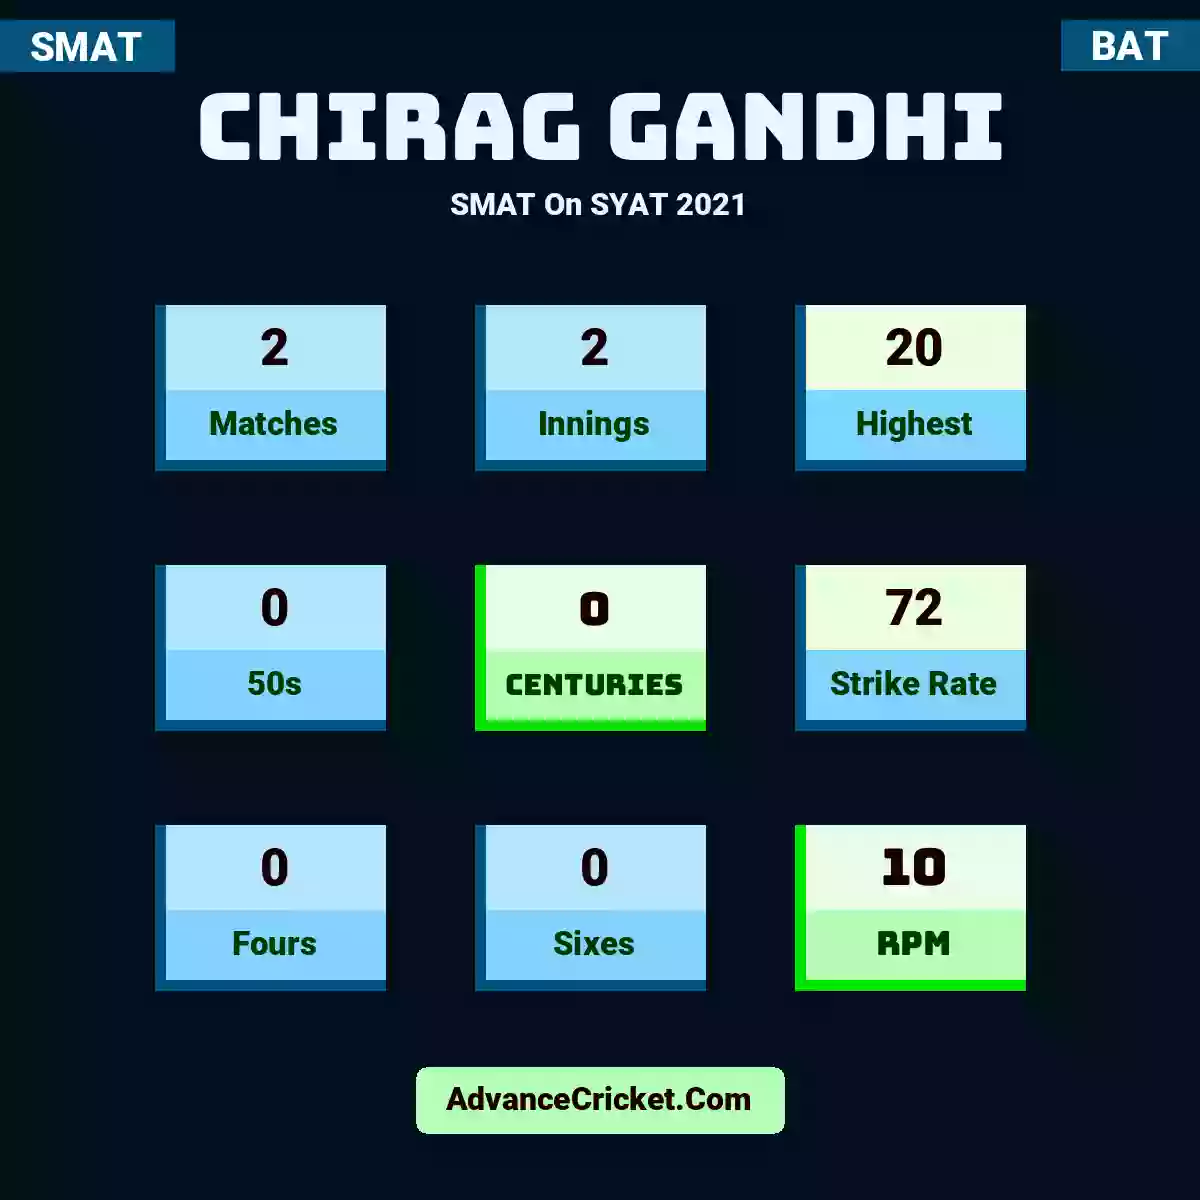 Chirag Gandhi SMAT  On SYAT 2021, Chirag Gandhi played 2 matches, scored 20 runs as highest, 0 half-centuries, and 0 centuries, with a strike rate of 72. C.Gandhi hit 0 fours and 0 sixes, with an RPM of 10.